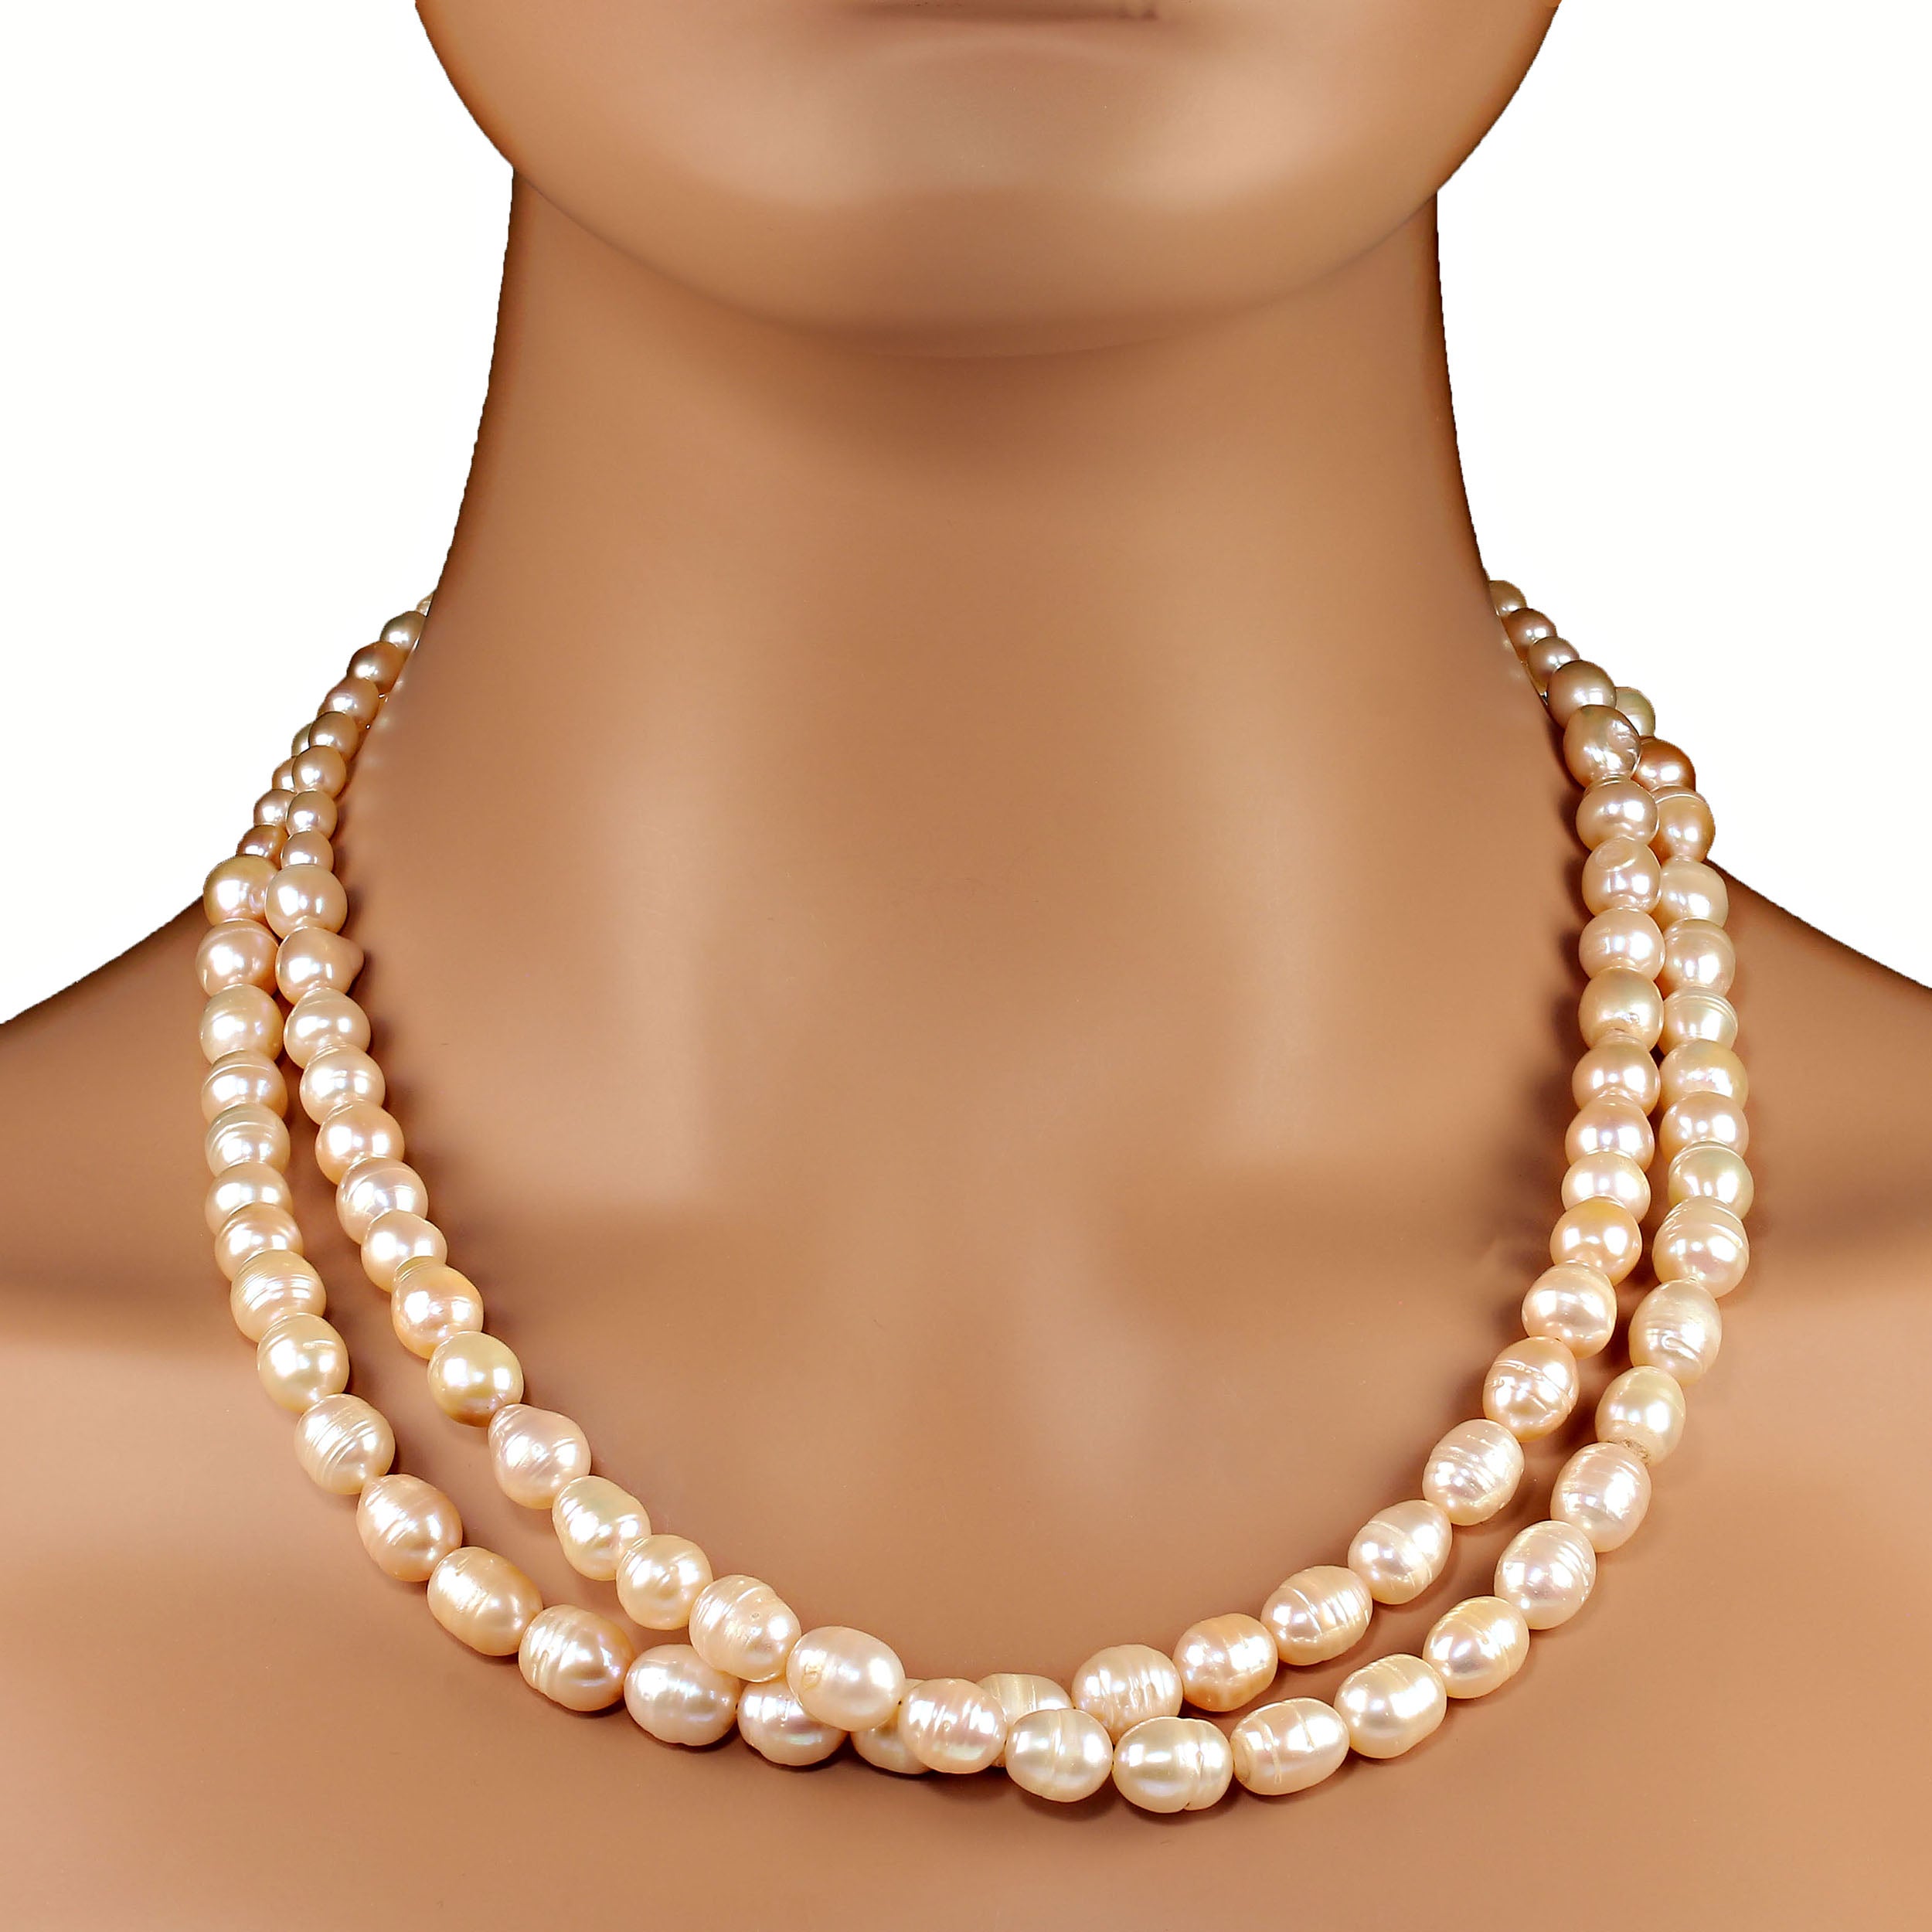 AJD 21 Inch 2 Strand Graduated Light Pink Pearl Necklace  Great Gift For Sale